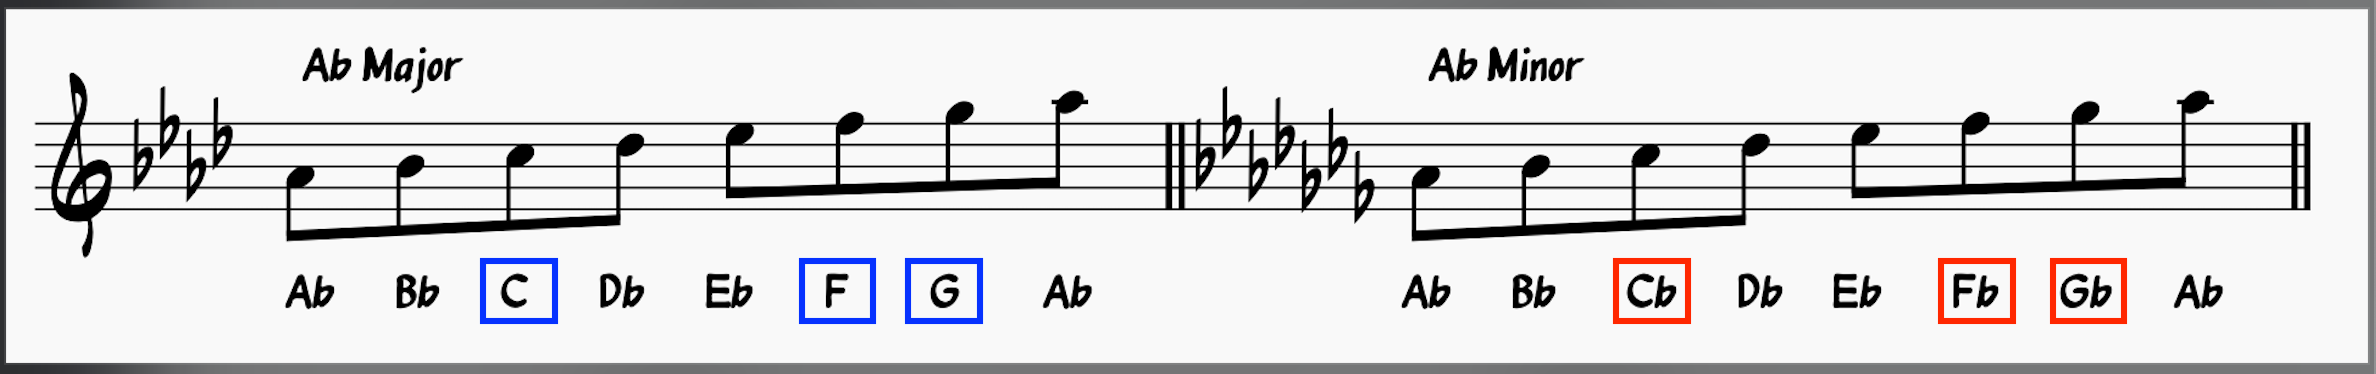 Ab major and parallel key Ab minor